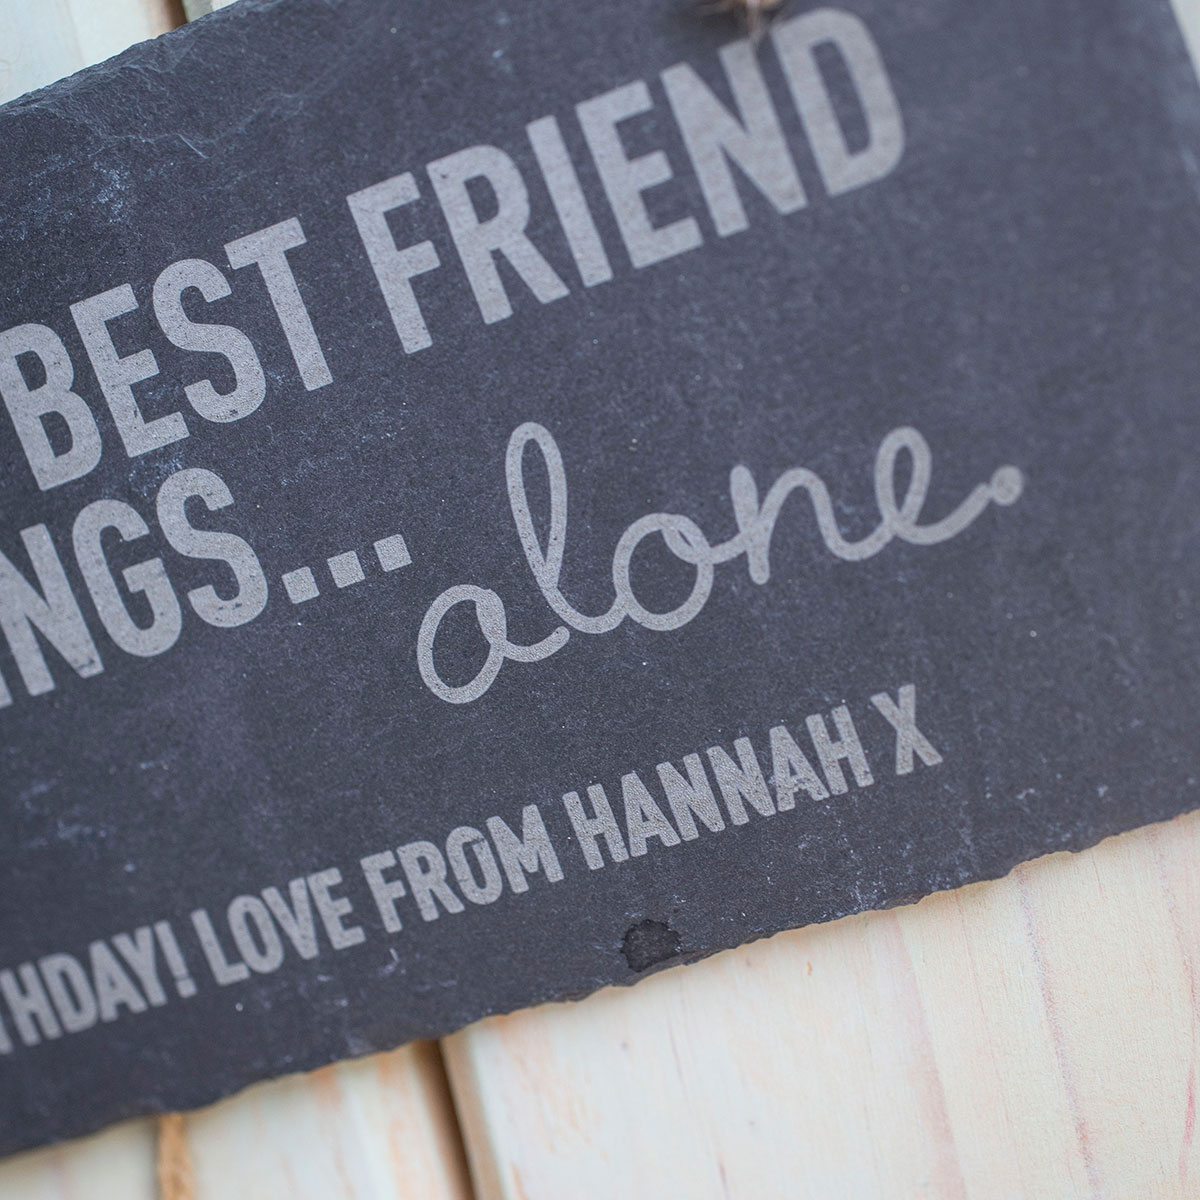 Personalised Hanging Slate Sign - I Never Let My Best Friend...